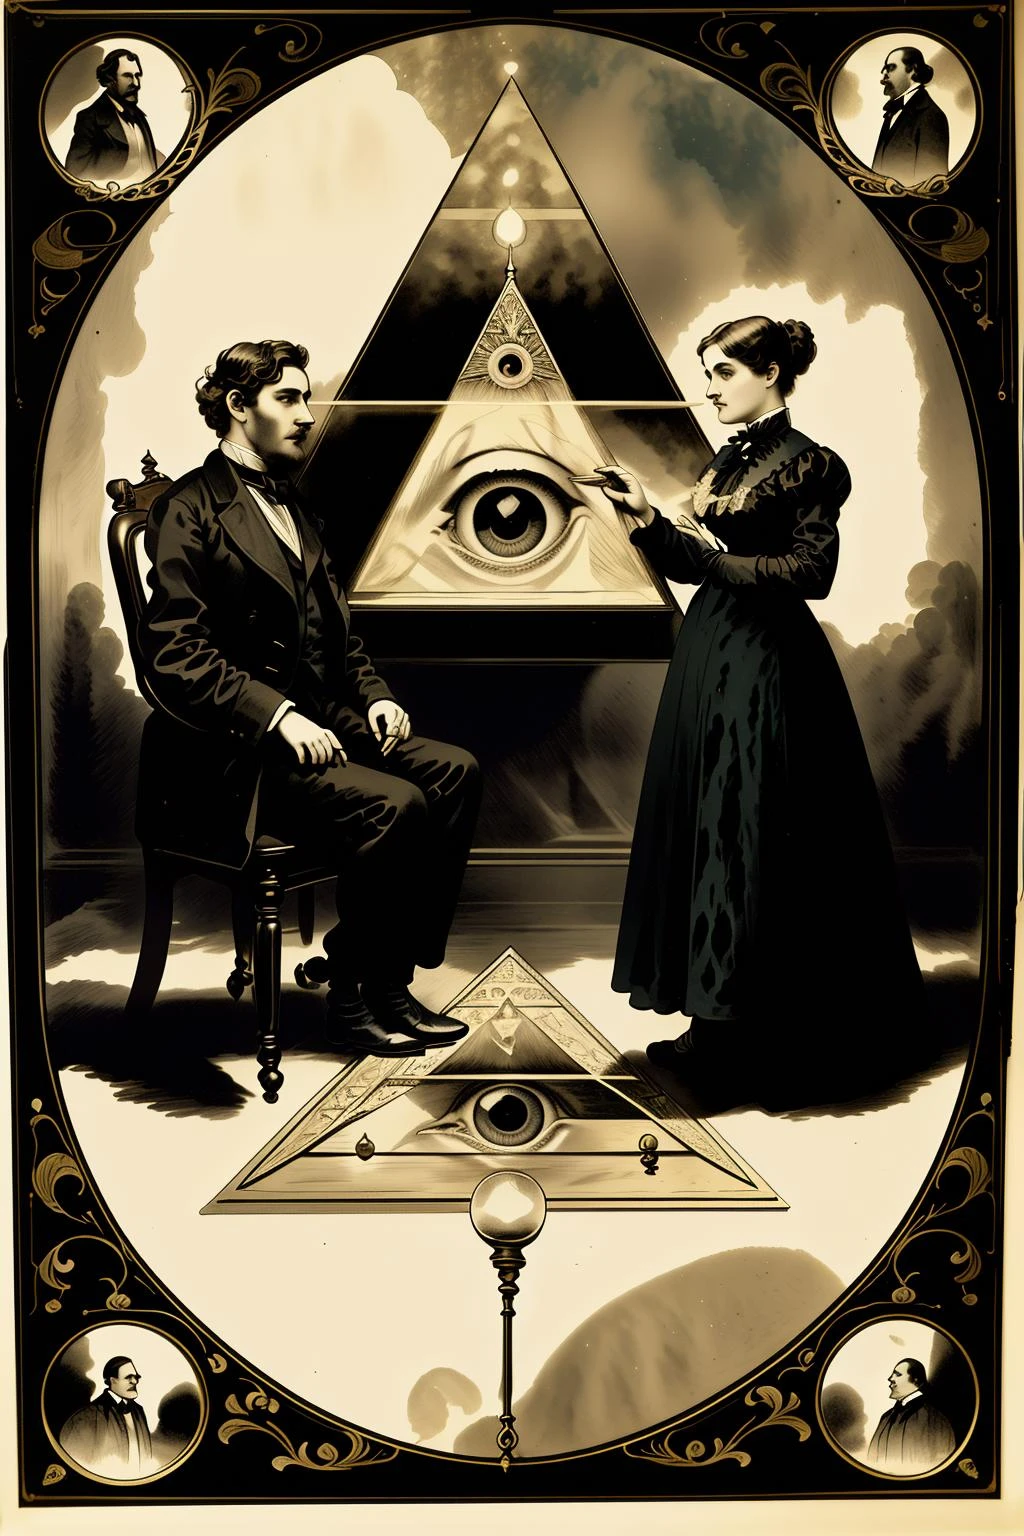 a vitoriano  poster advertising a  a painting of two people sitting on a rug in front of a pyramid with an eye in the center of the image and a third person standing on the floor , 1800, Charles McAuley, ambientado em 1860, uma tela de seda, escola americana barbizon,  vitoriano_esotérico , (( vitoriano style graphic ))